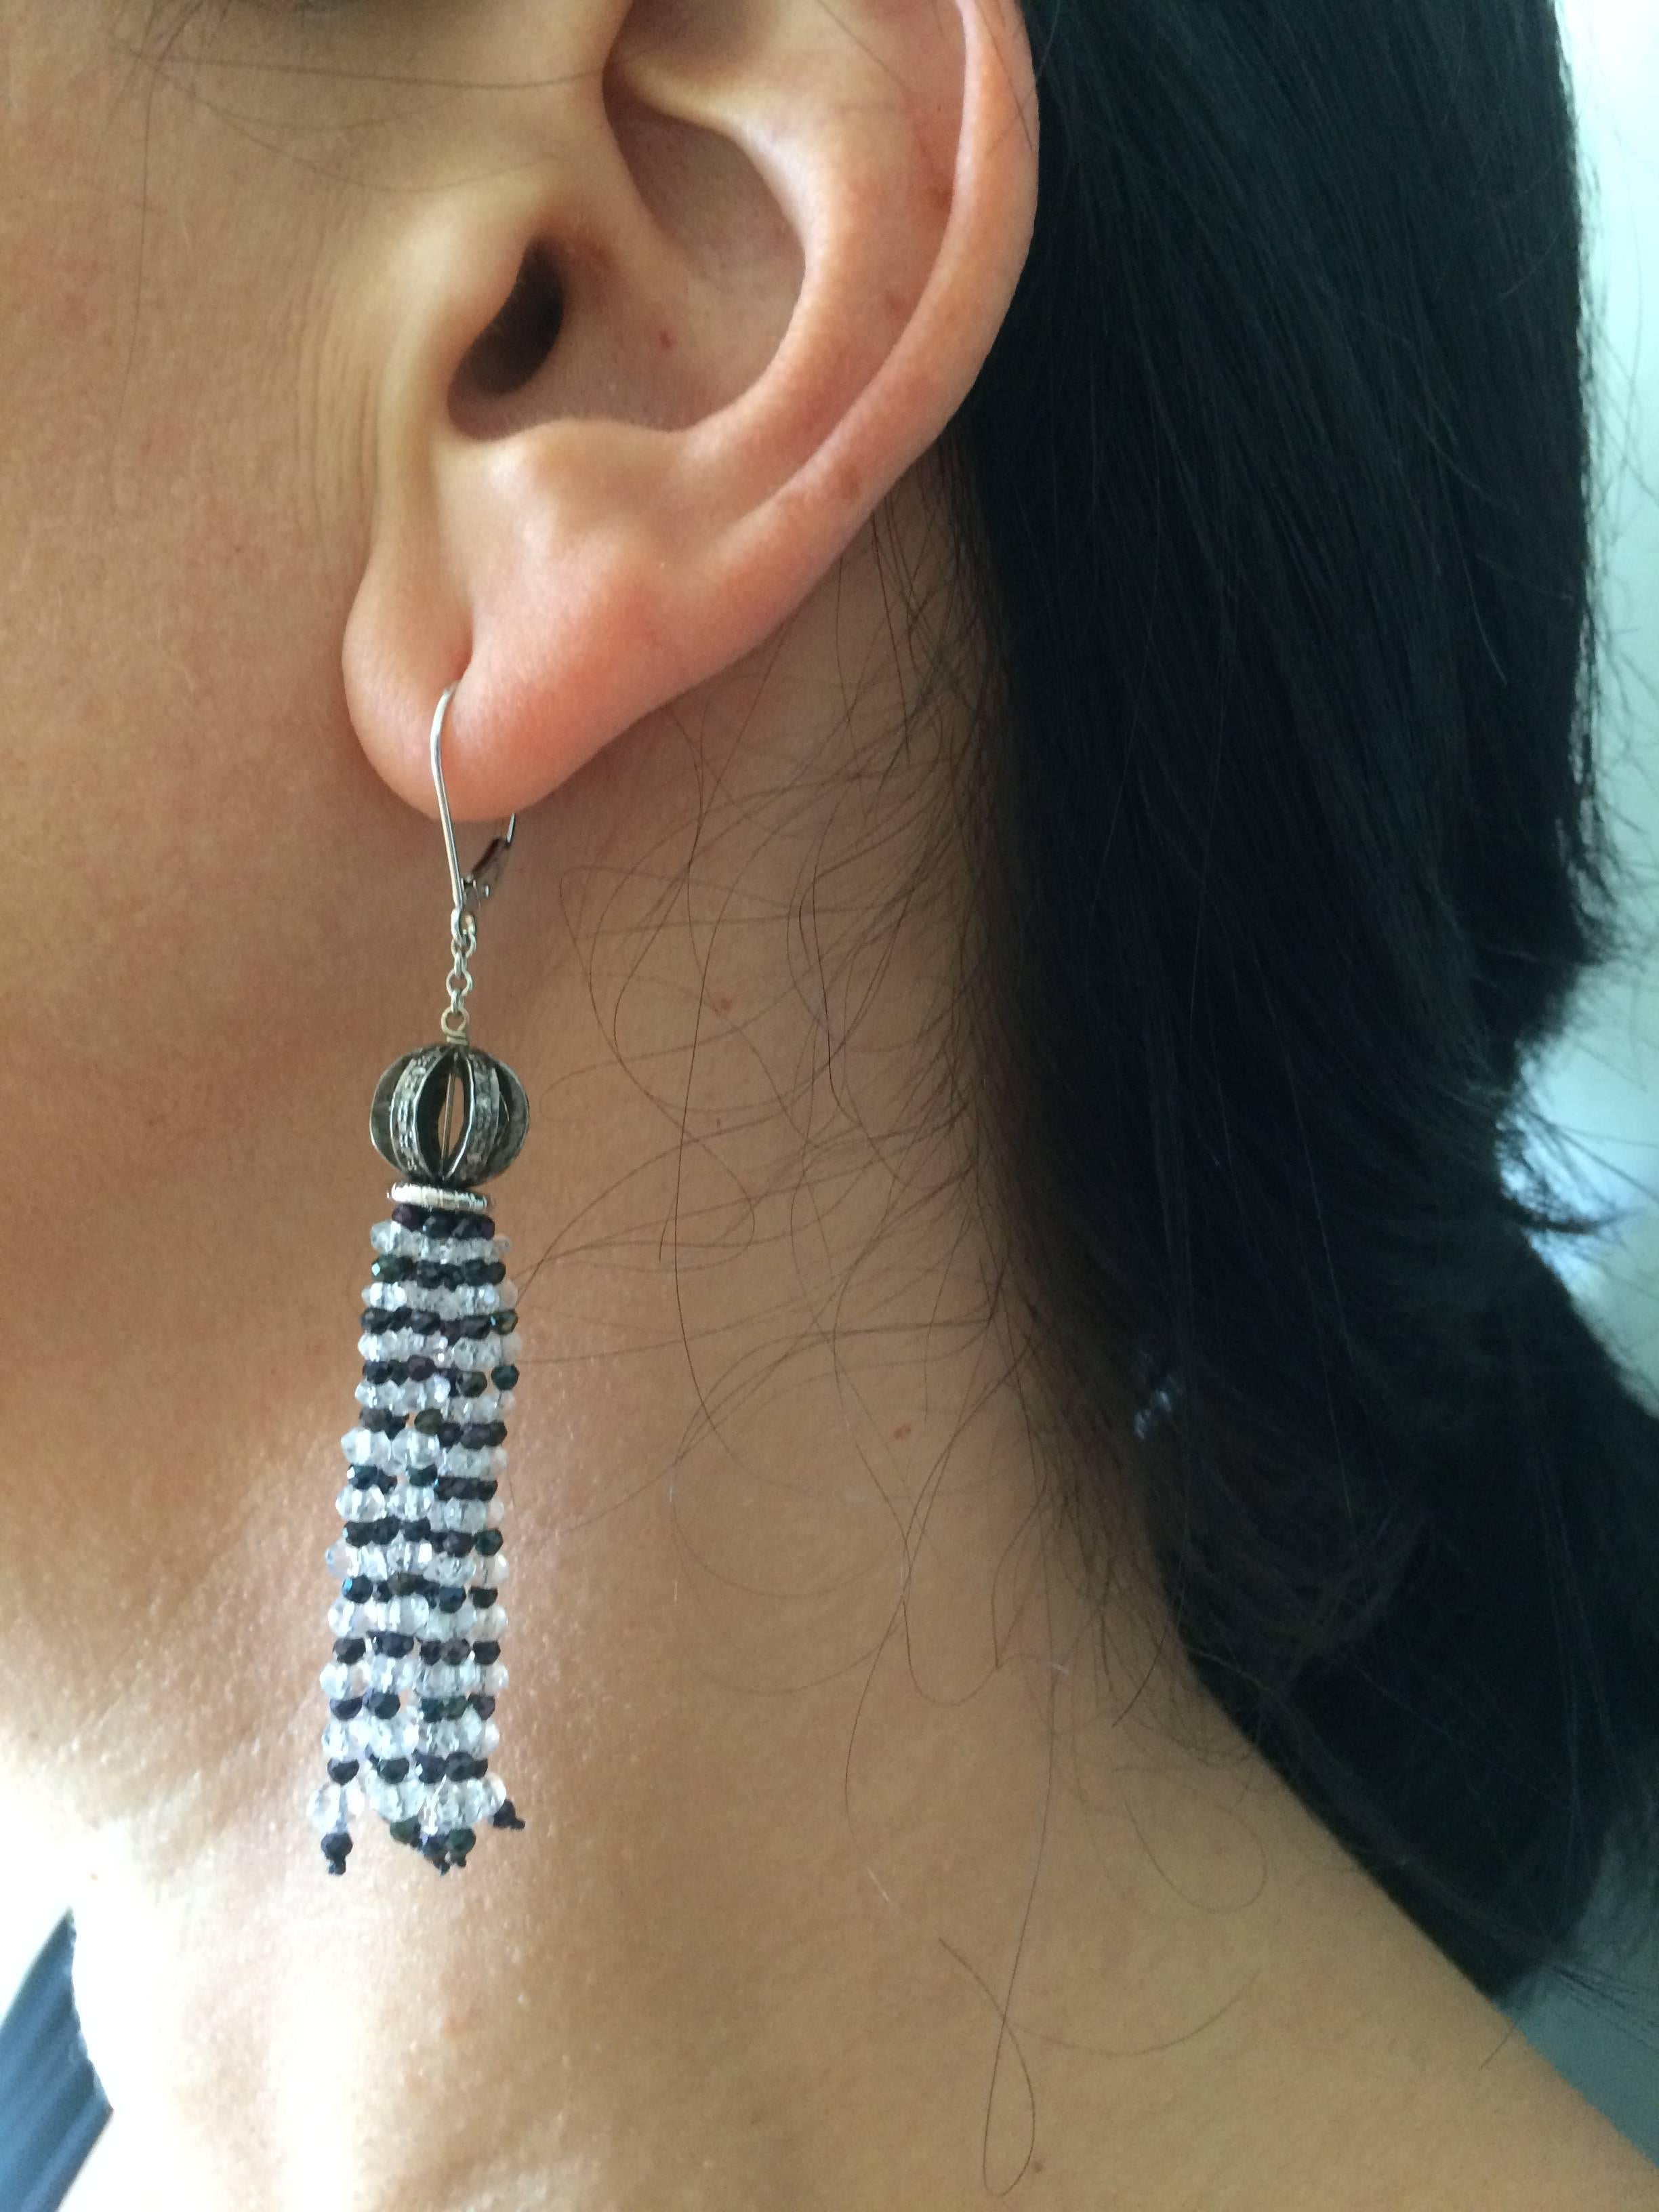 Diamond Encrusted Ball Earrings with Quartz and Black Spinel Tassels by Marina J 2